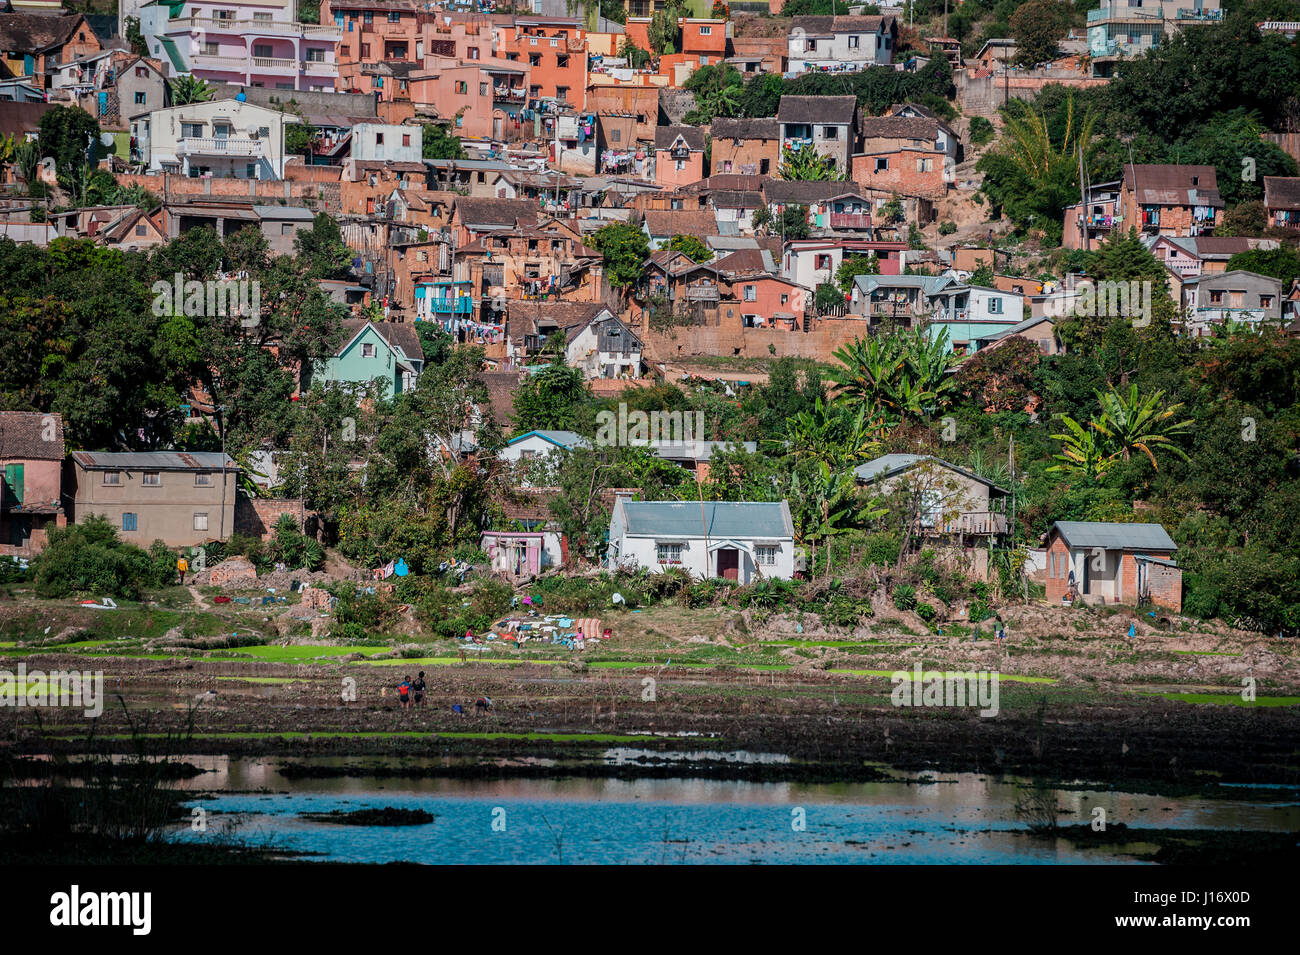 A neighborhood in the Madagascan capital of Antananarivo perched above rice fields Stock Photo